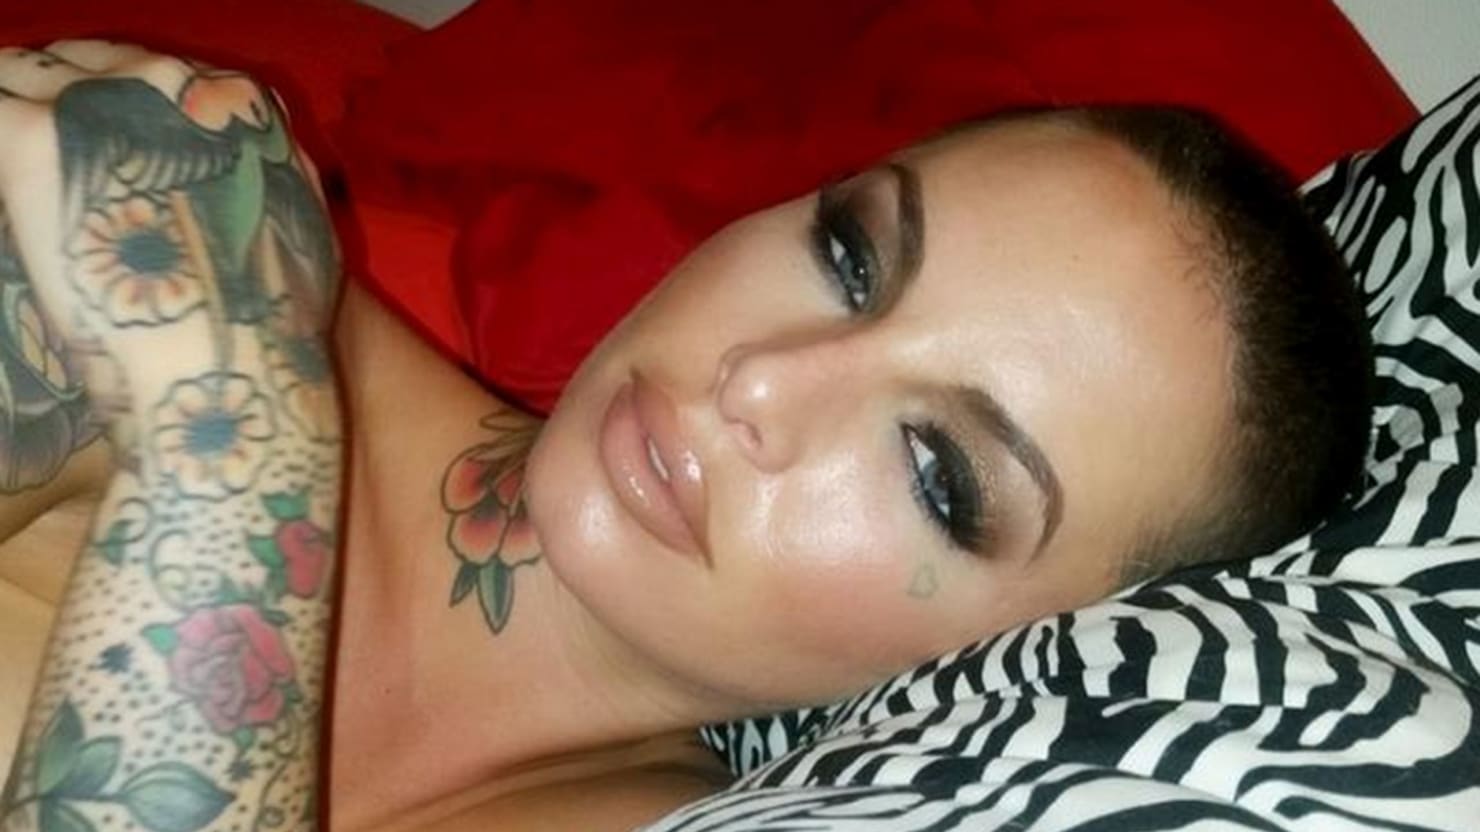 Christy - Christy Mack Is Done With Porn